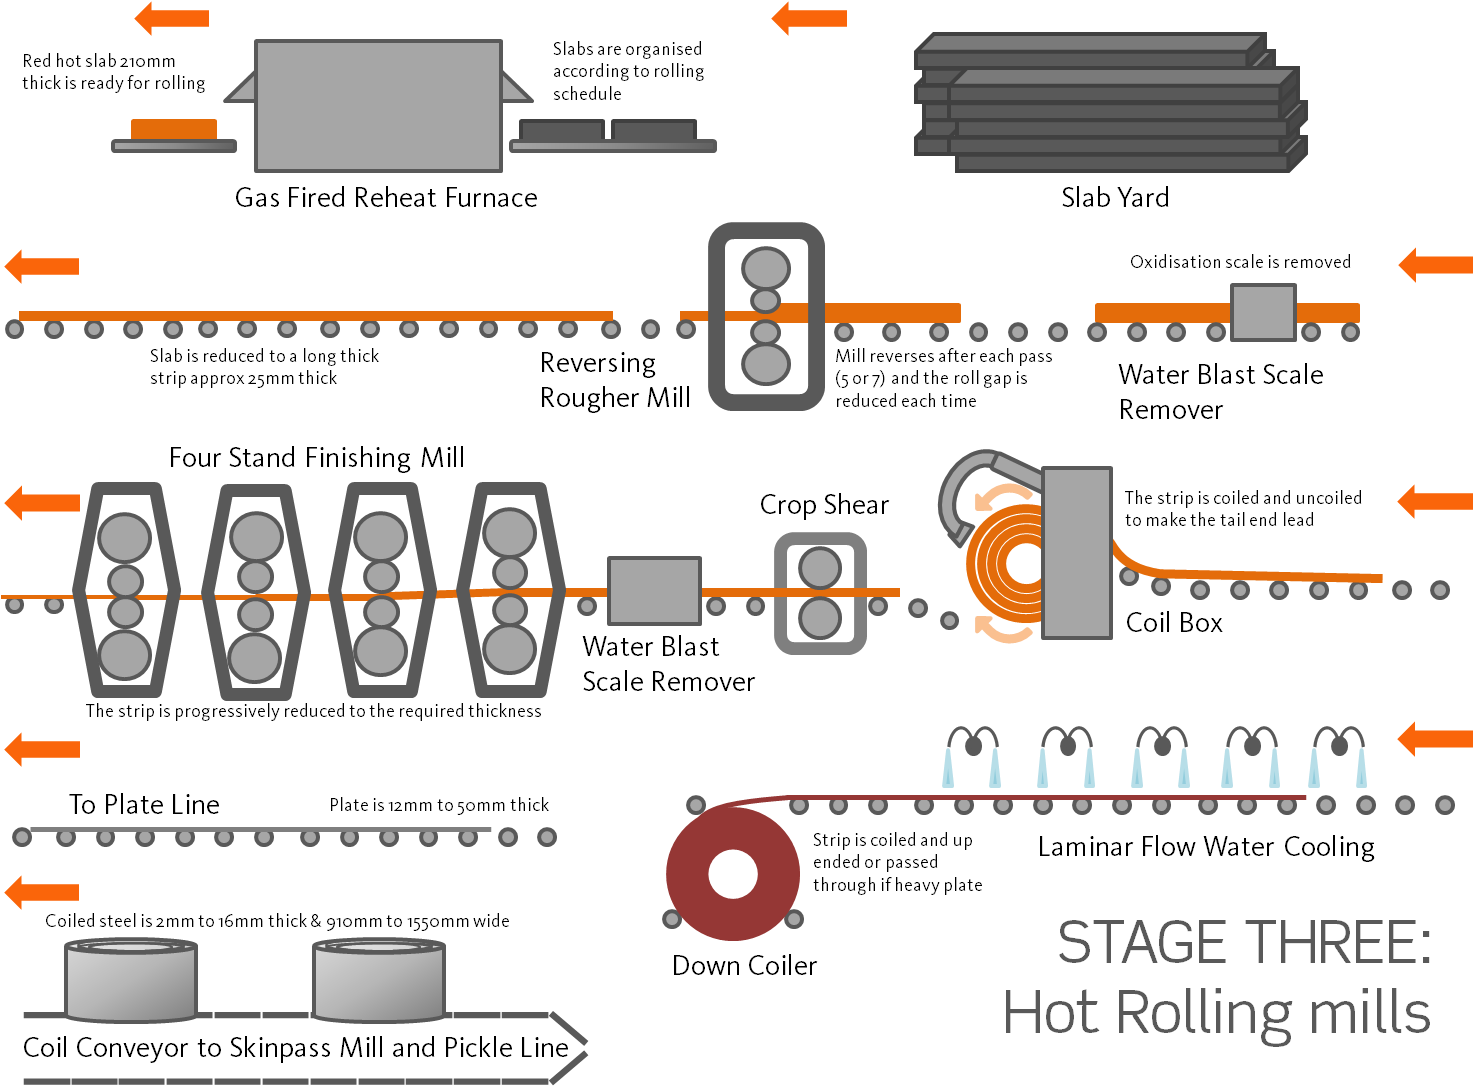 Hot Rolling Mill. Hot Rolling Coil. Hot rolled Coils. Hot Rolling Cold Rolling.